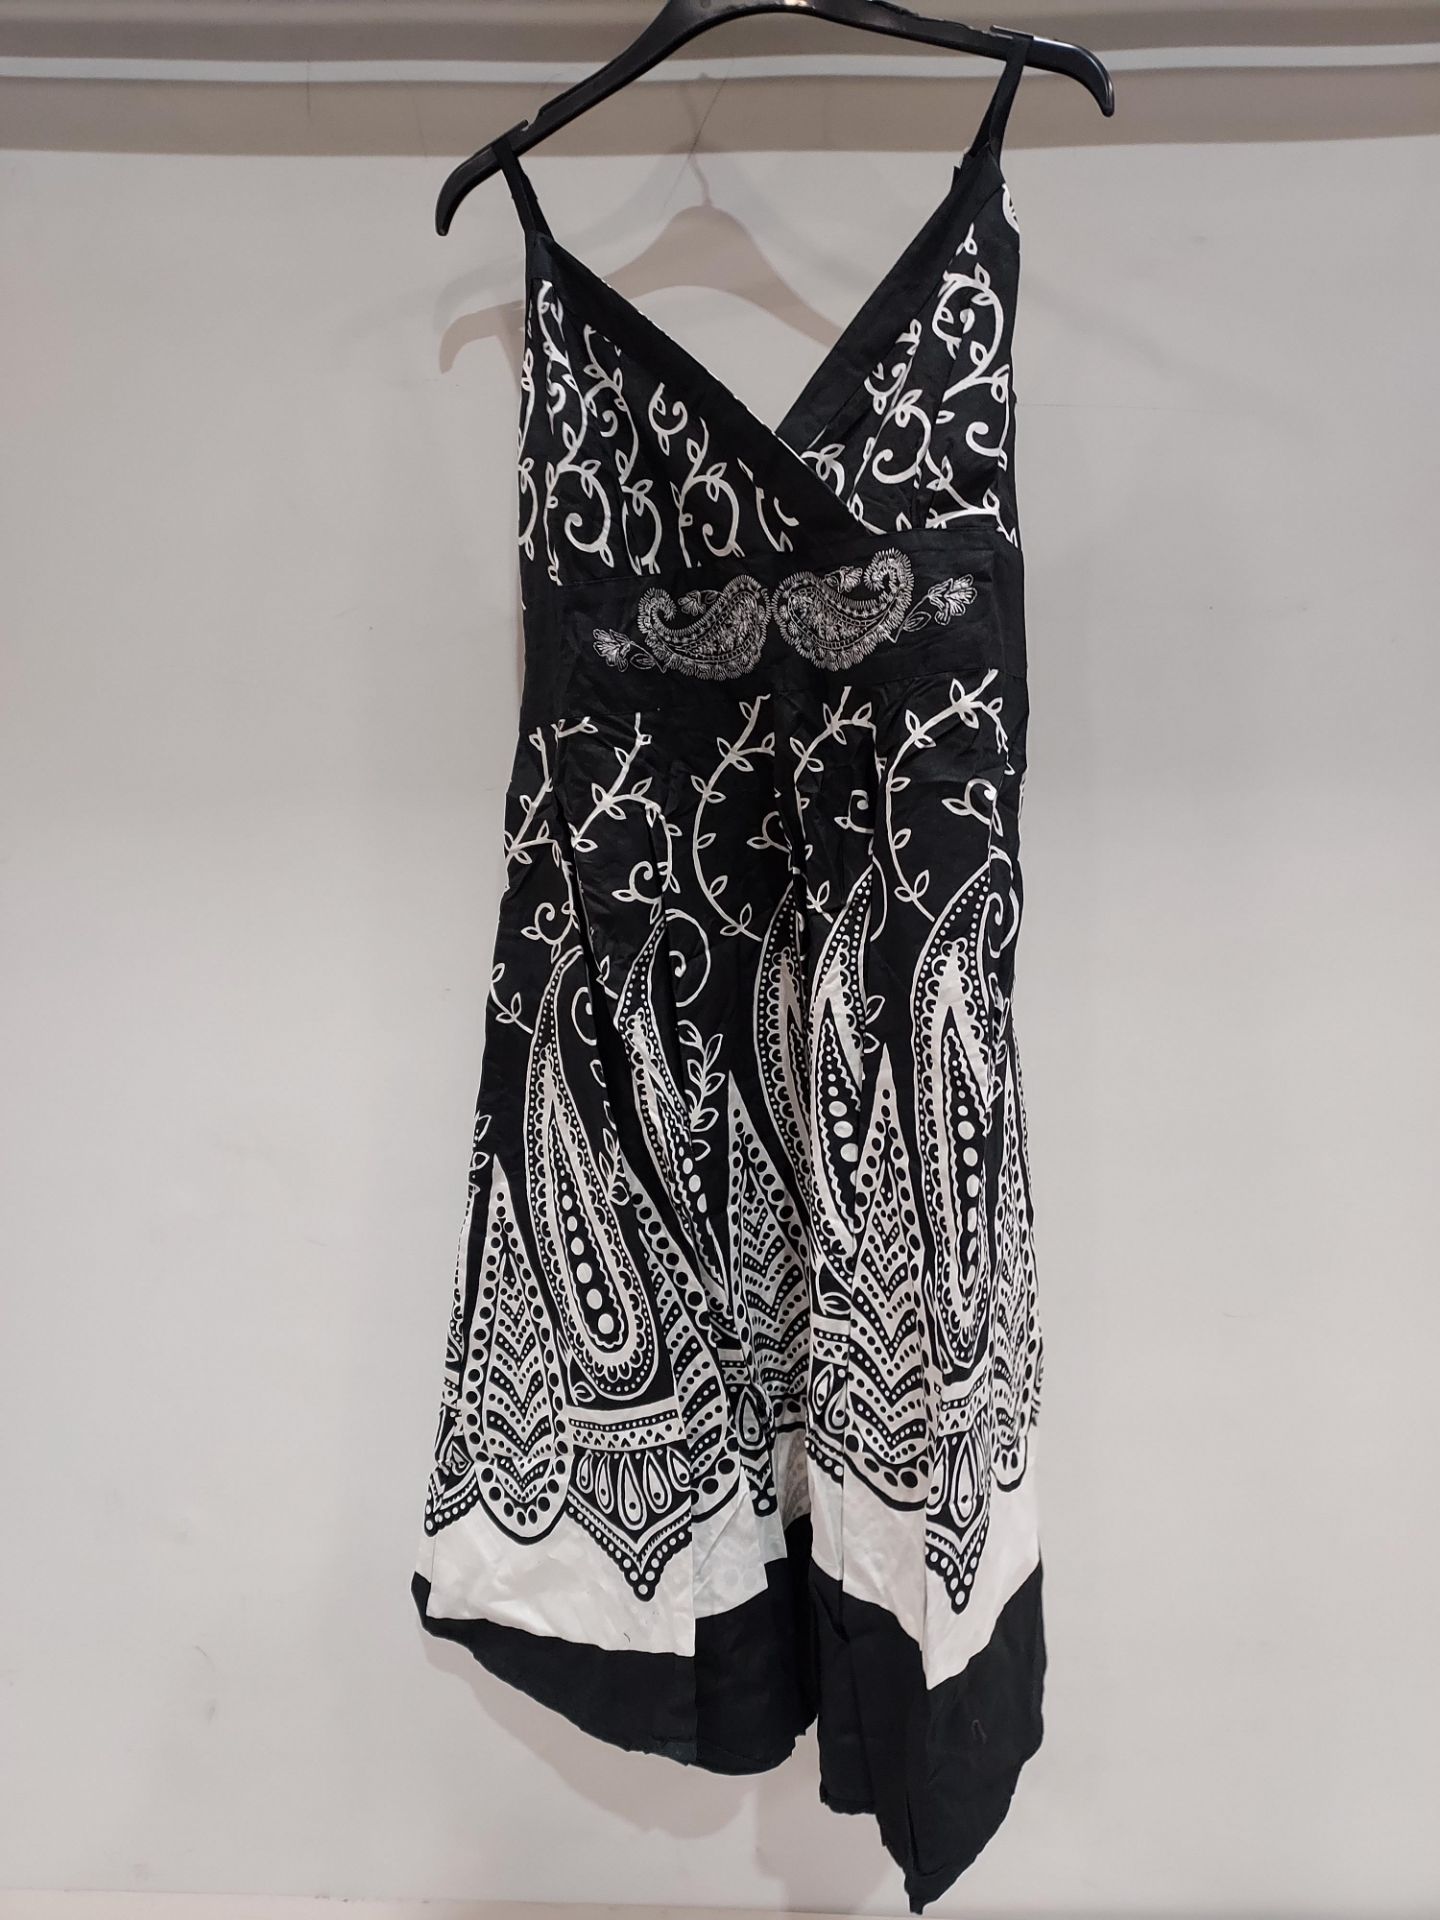 12 X BRAND NEW PISTACHIO SUMMER DRESSES IN BLACK/WHITE SIZES 2 SMALL , 2 M , 8 LARGE (RRP EACH £25